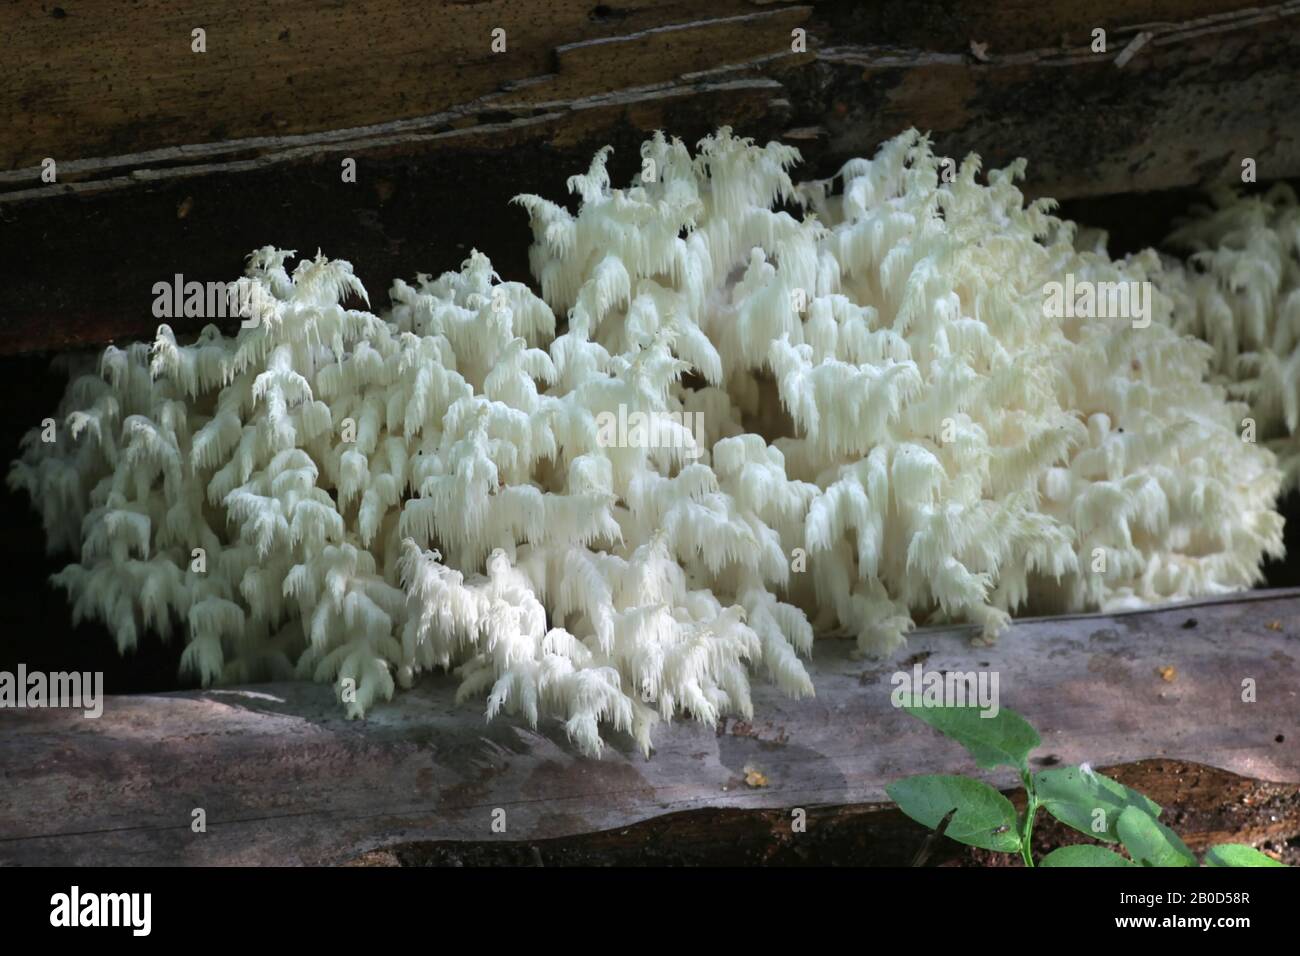 Hericium coralloides, known as the coral tooth fungus, wild mushroom from Finland Stock Photo